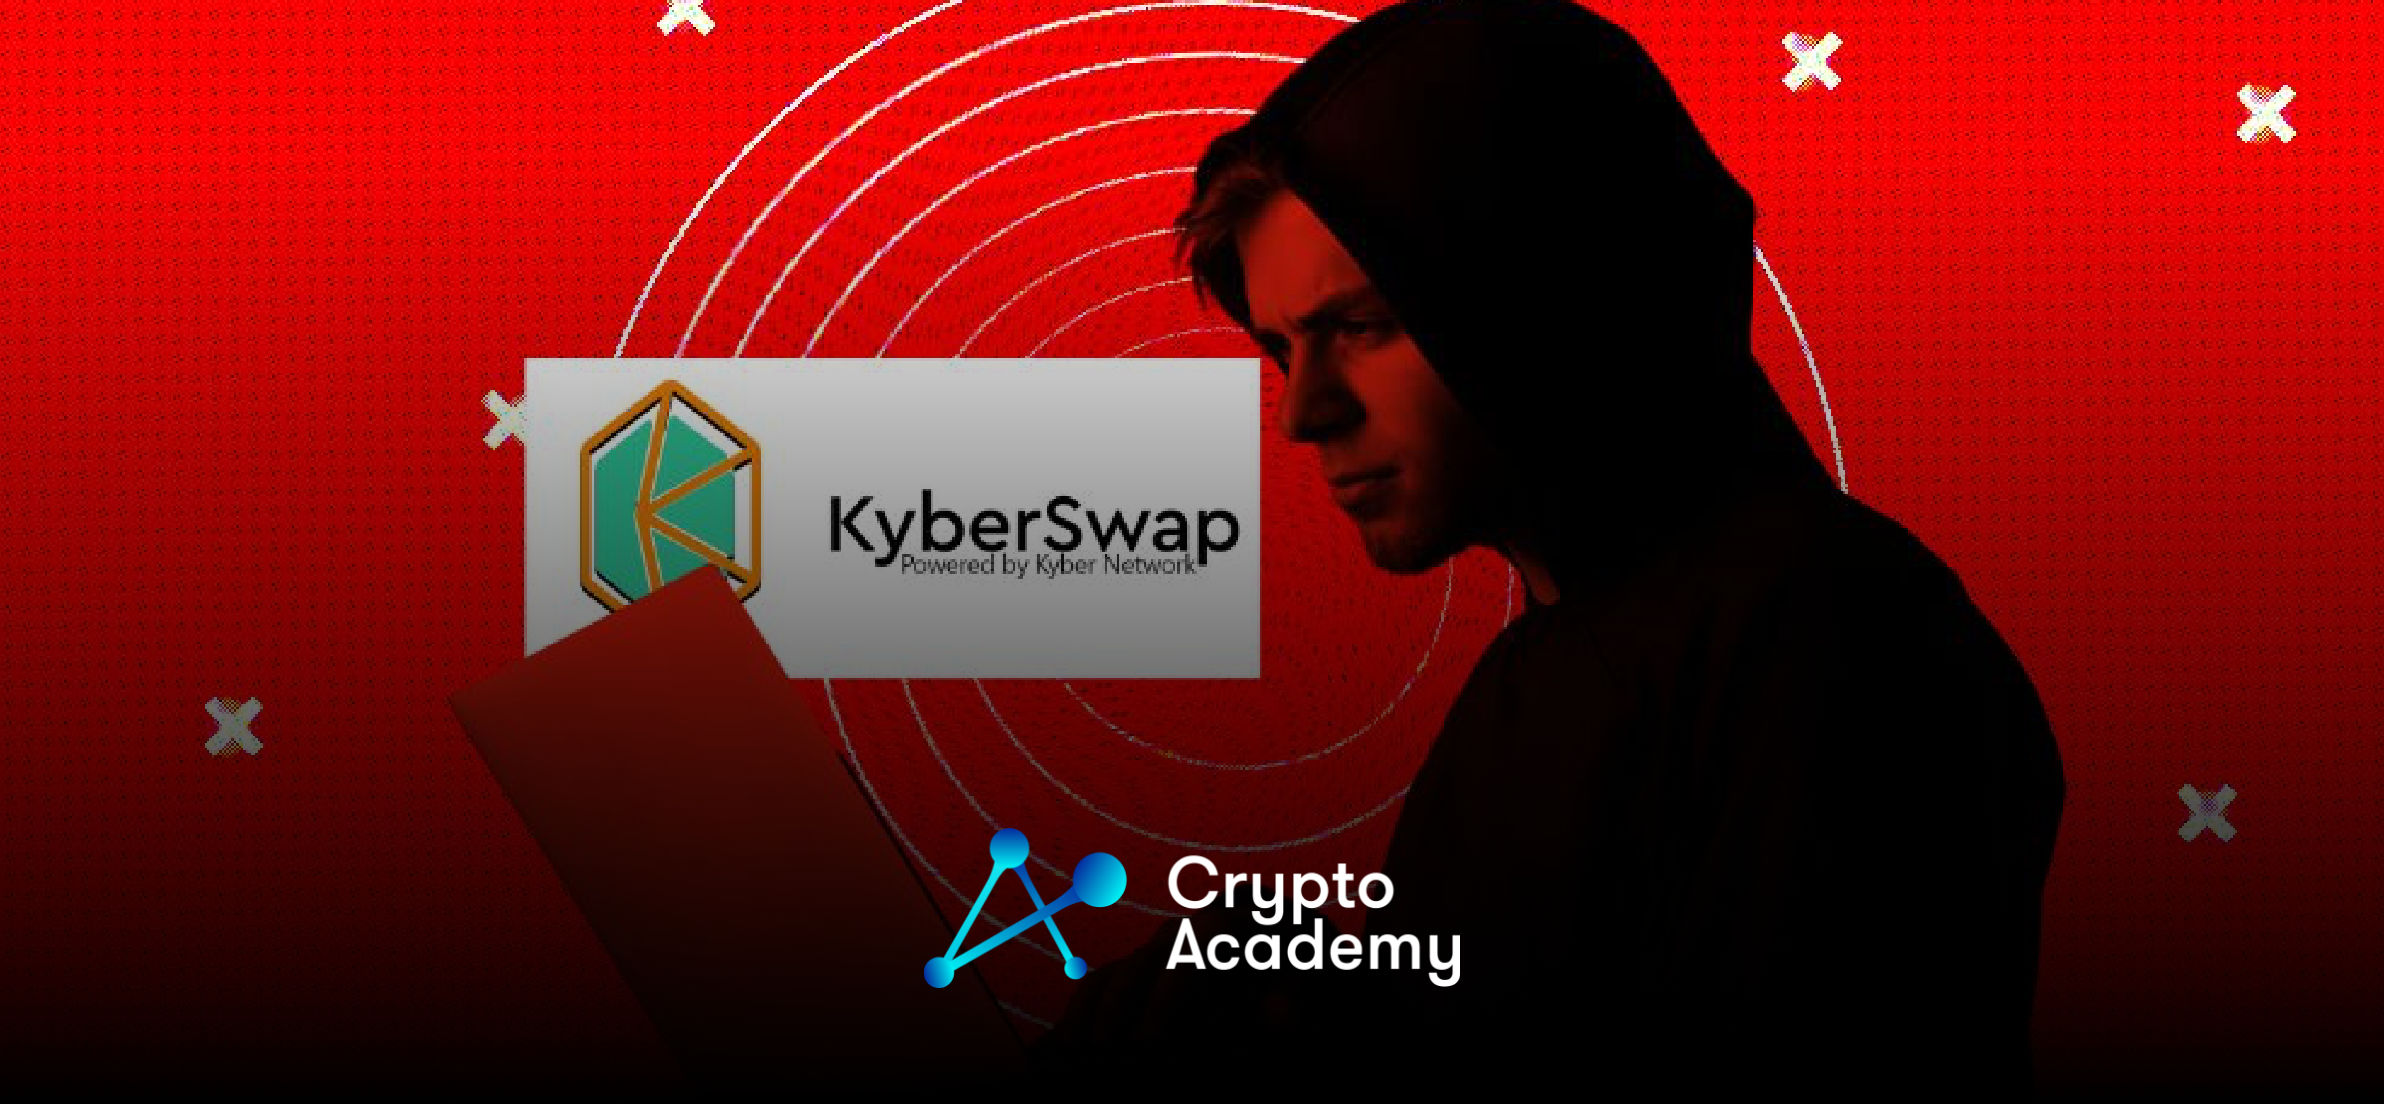 KyberSwap Offers Bounty in $46M Crypto Heist Recovery